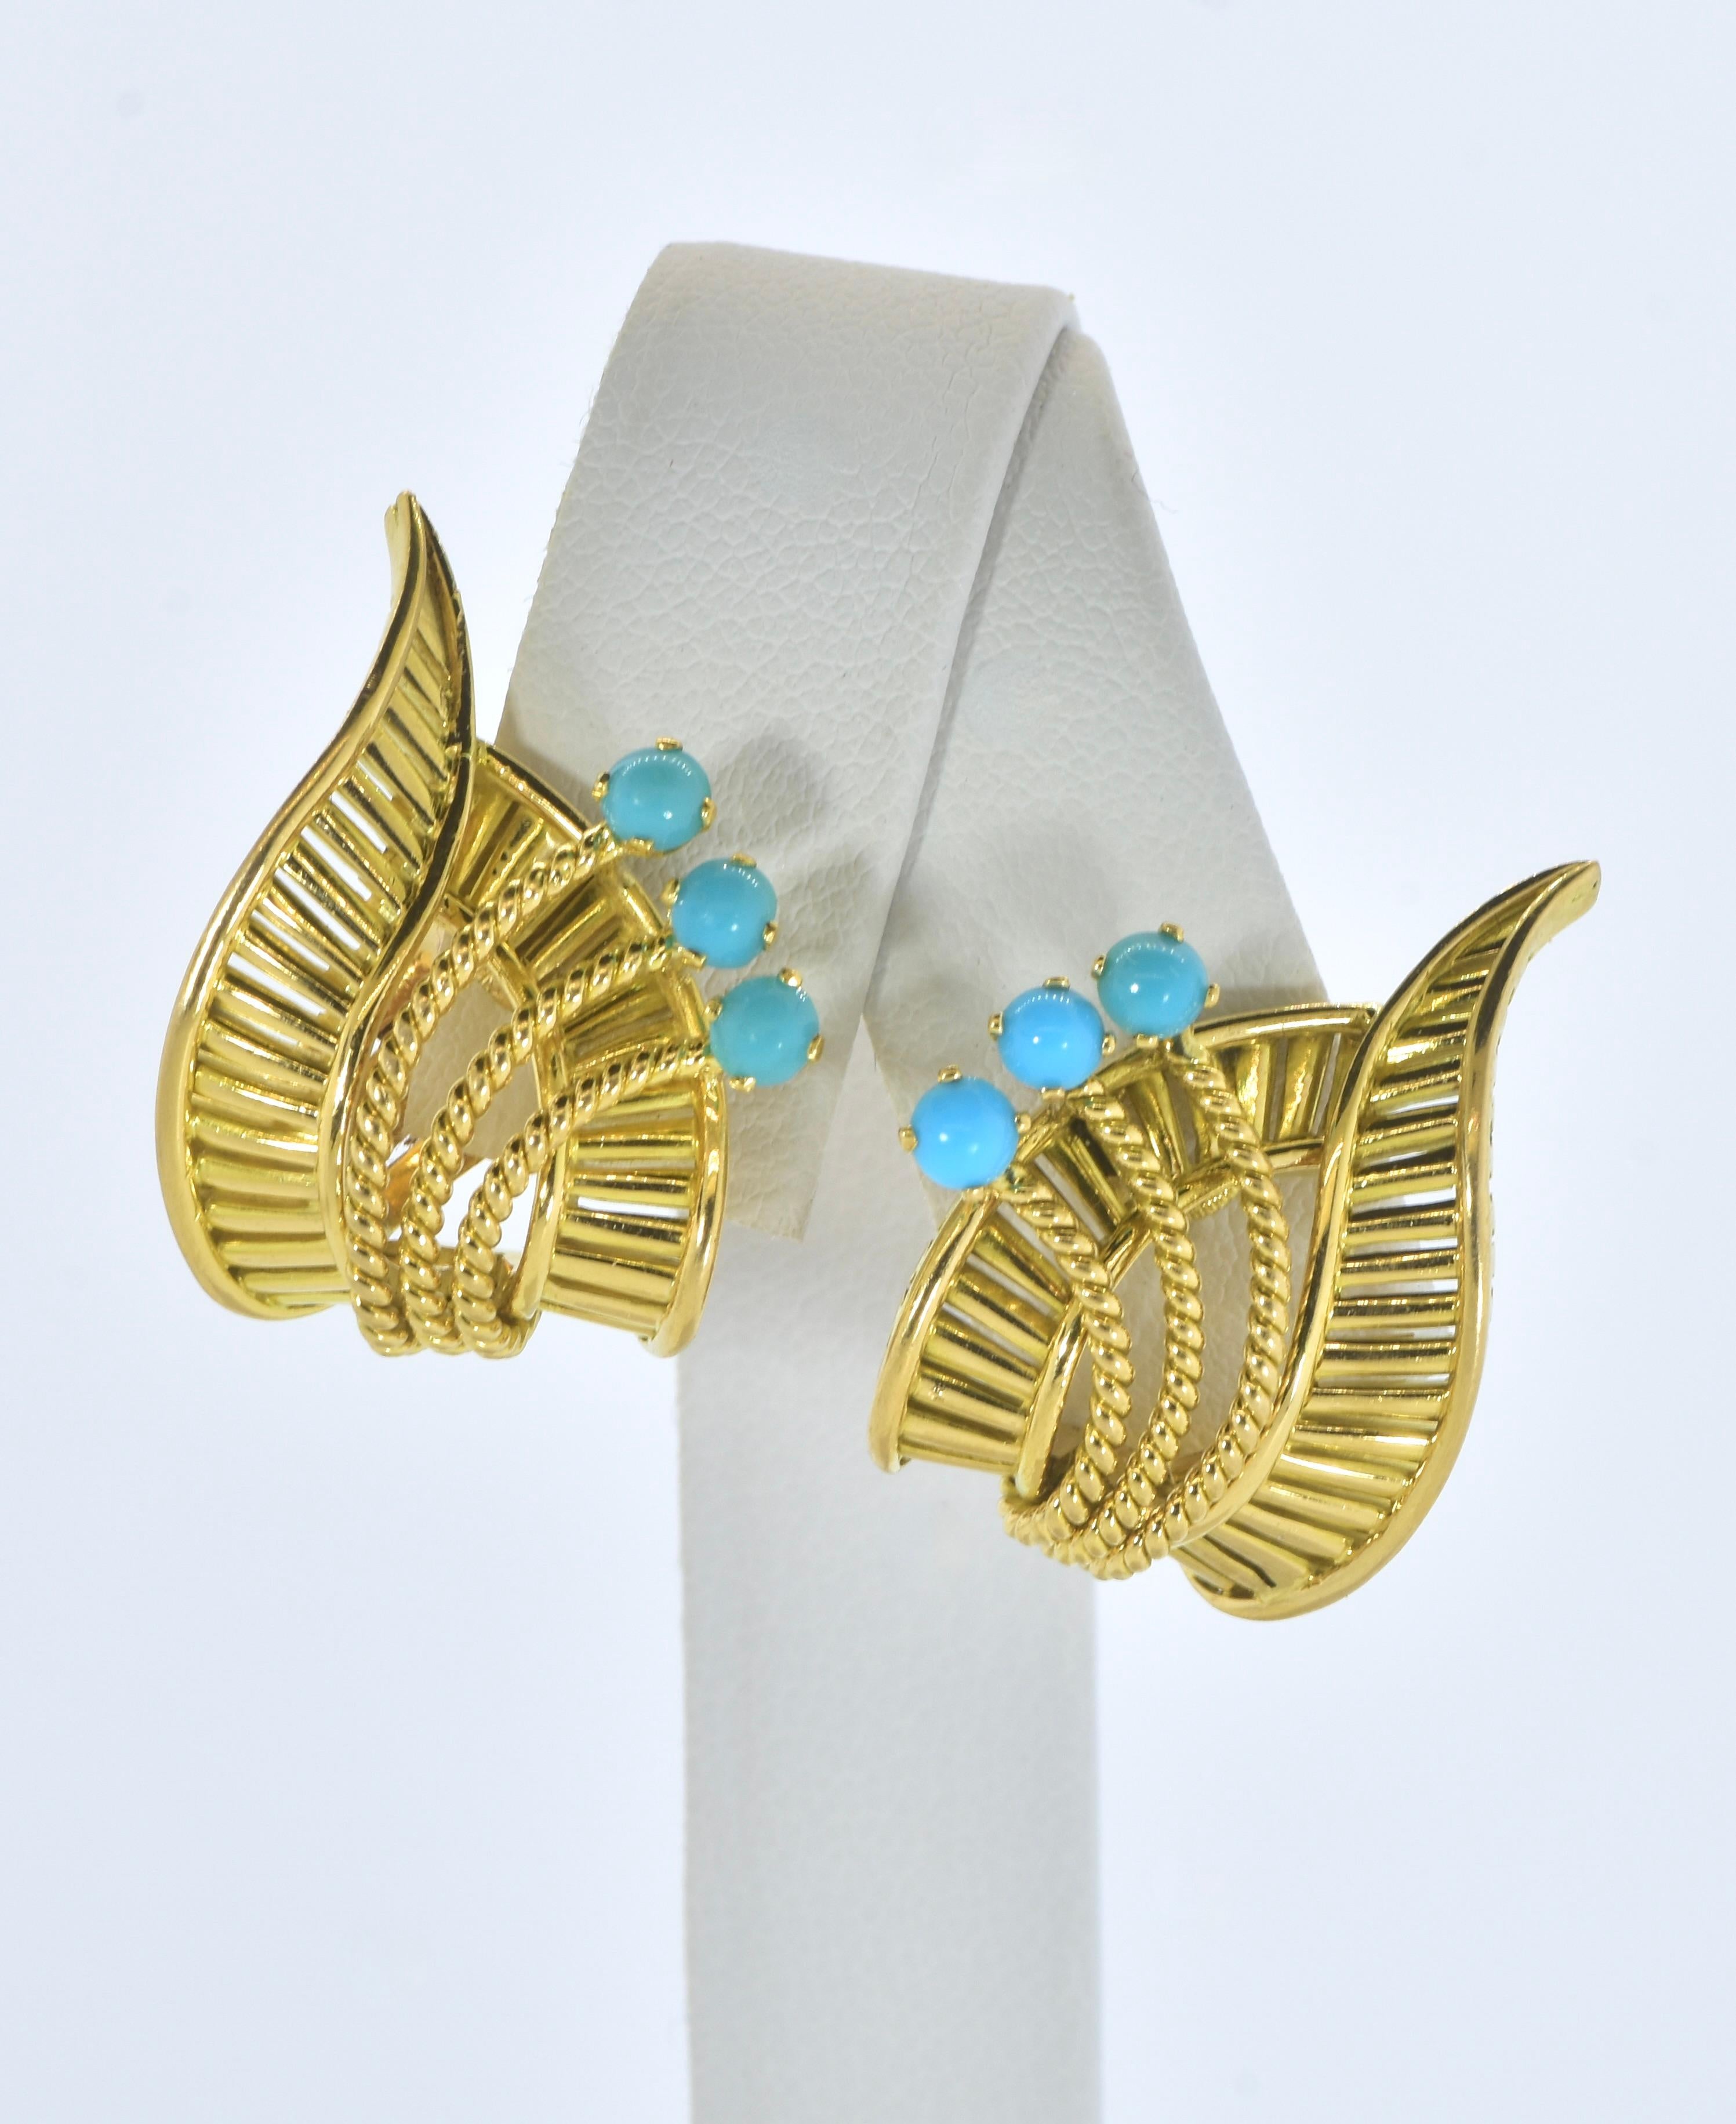 18K Yellow Gold Earrings with Fine Turquoise in a Leaf Motif, Vintage , c. 1950. In Excellent Condition For Sale In Aspen, CO